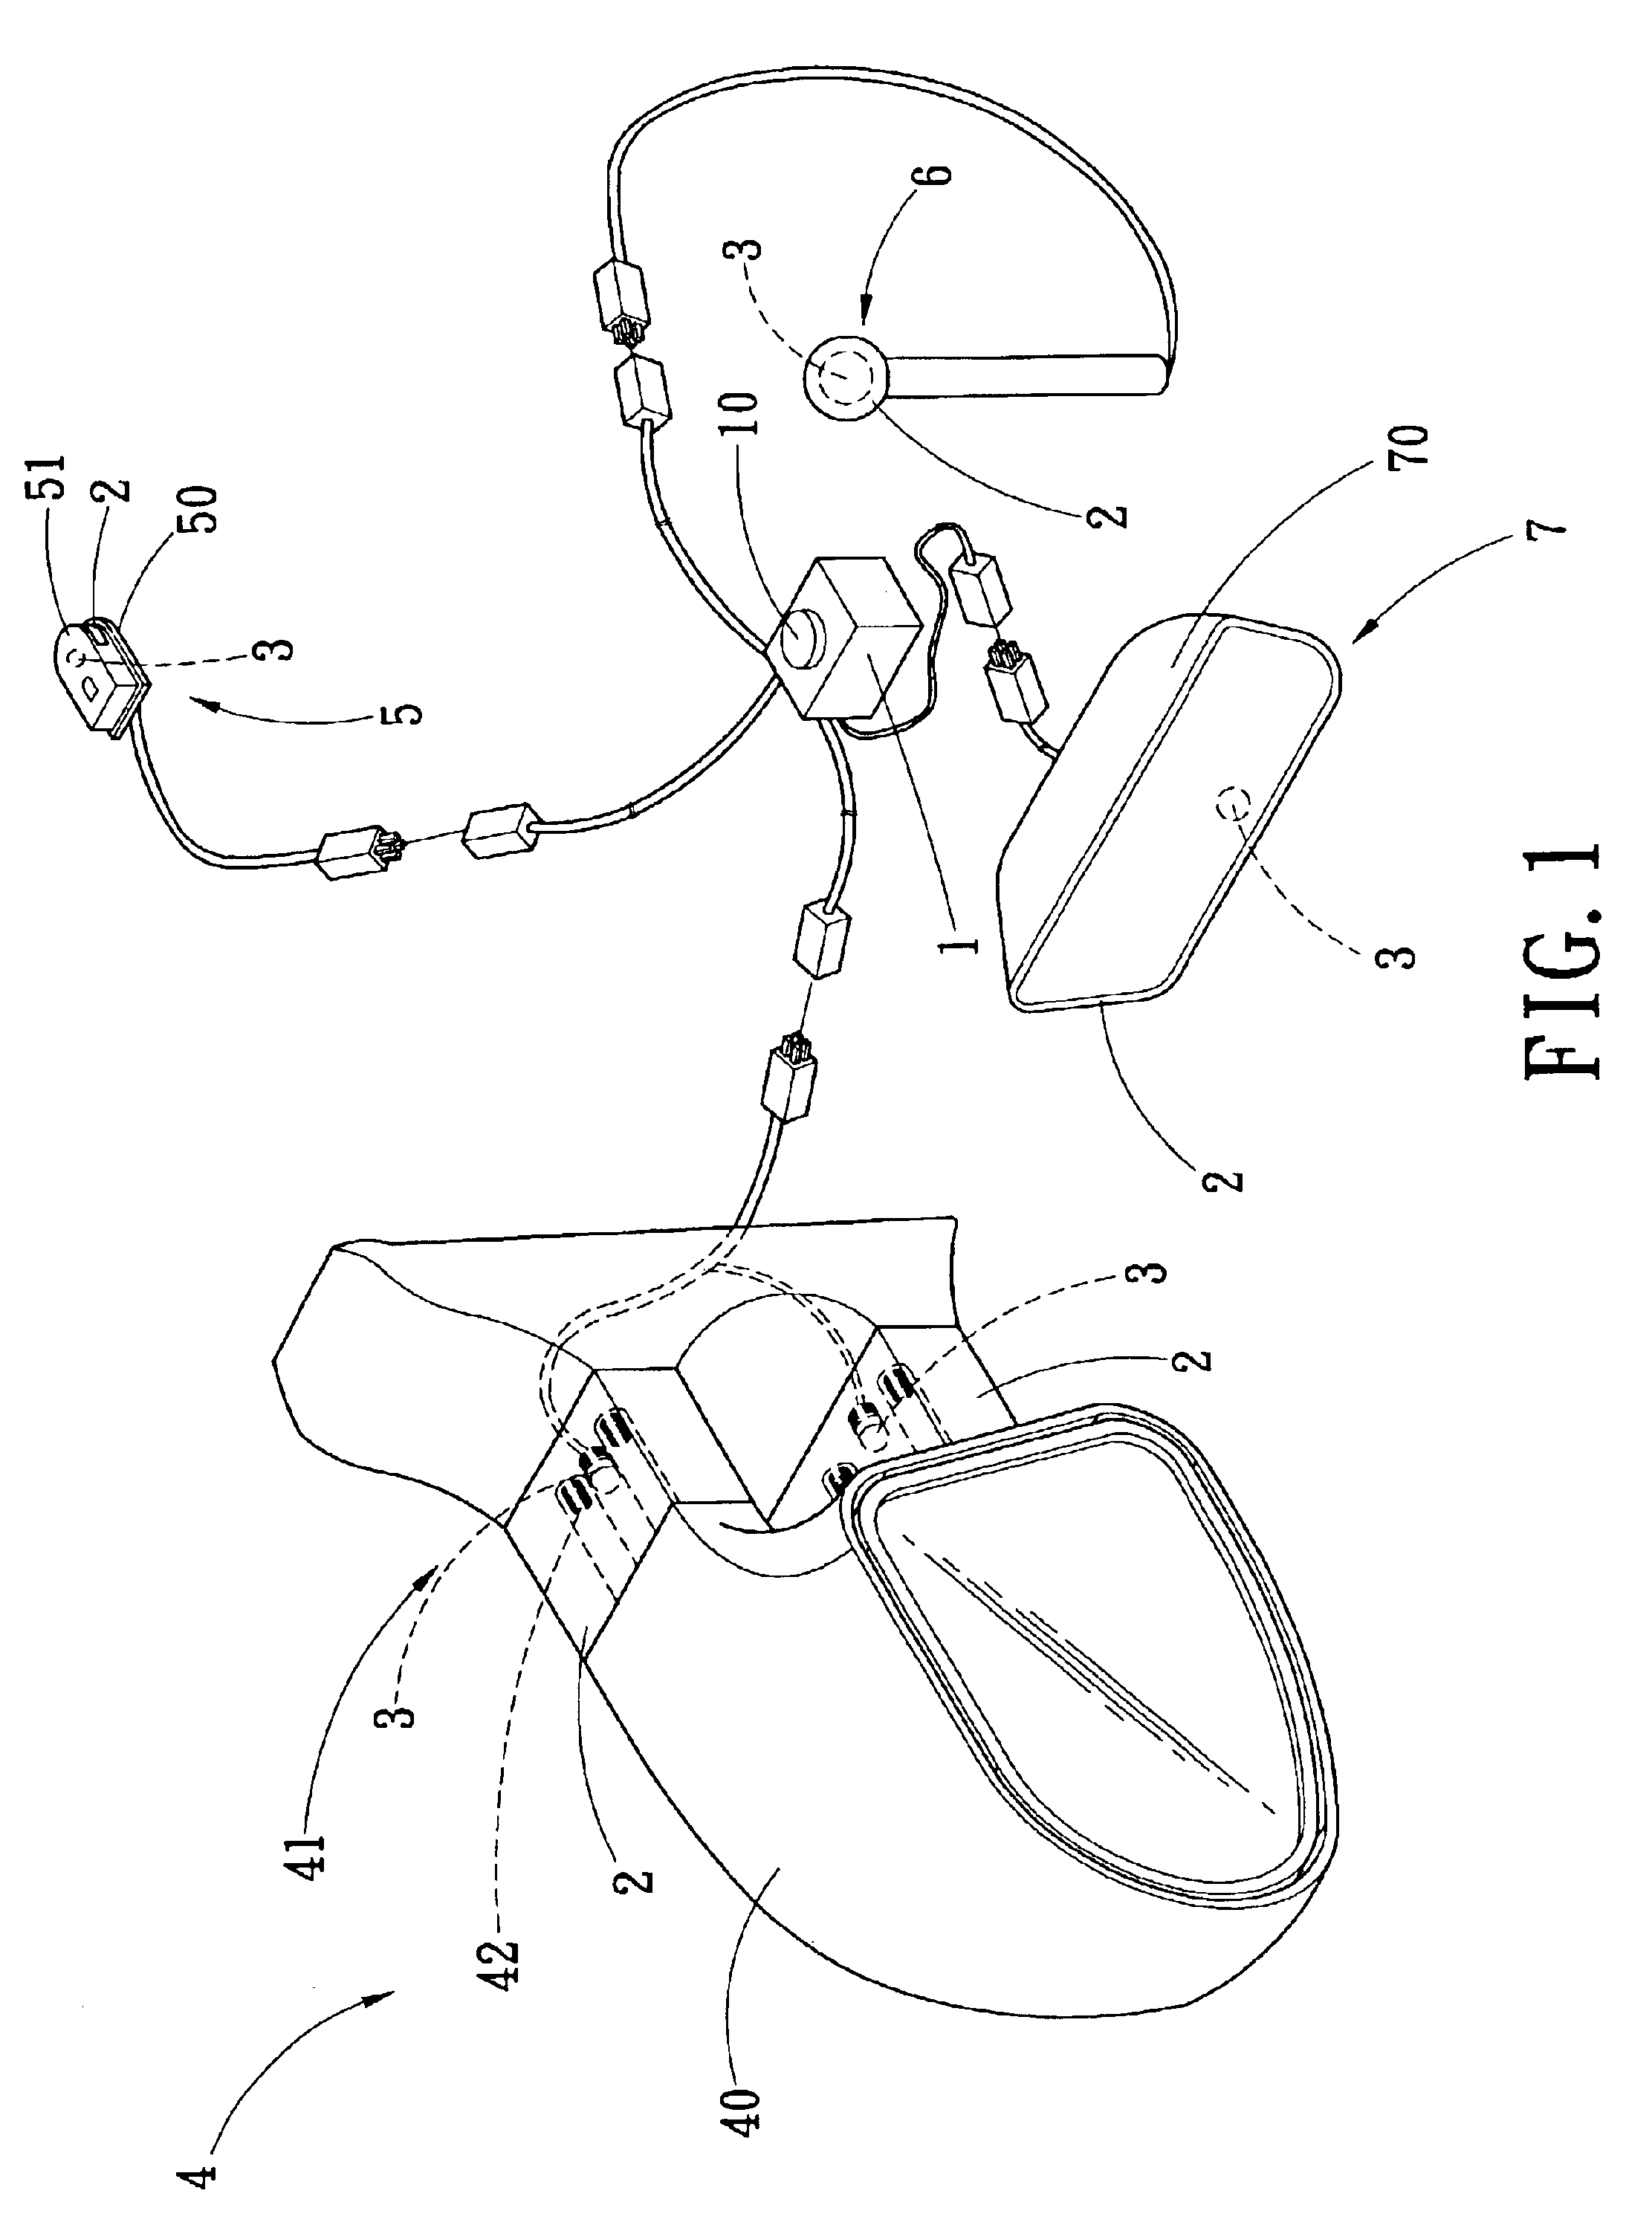 Color-changing illumination assembly for vehicle accessory